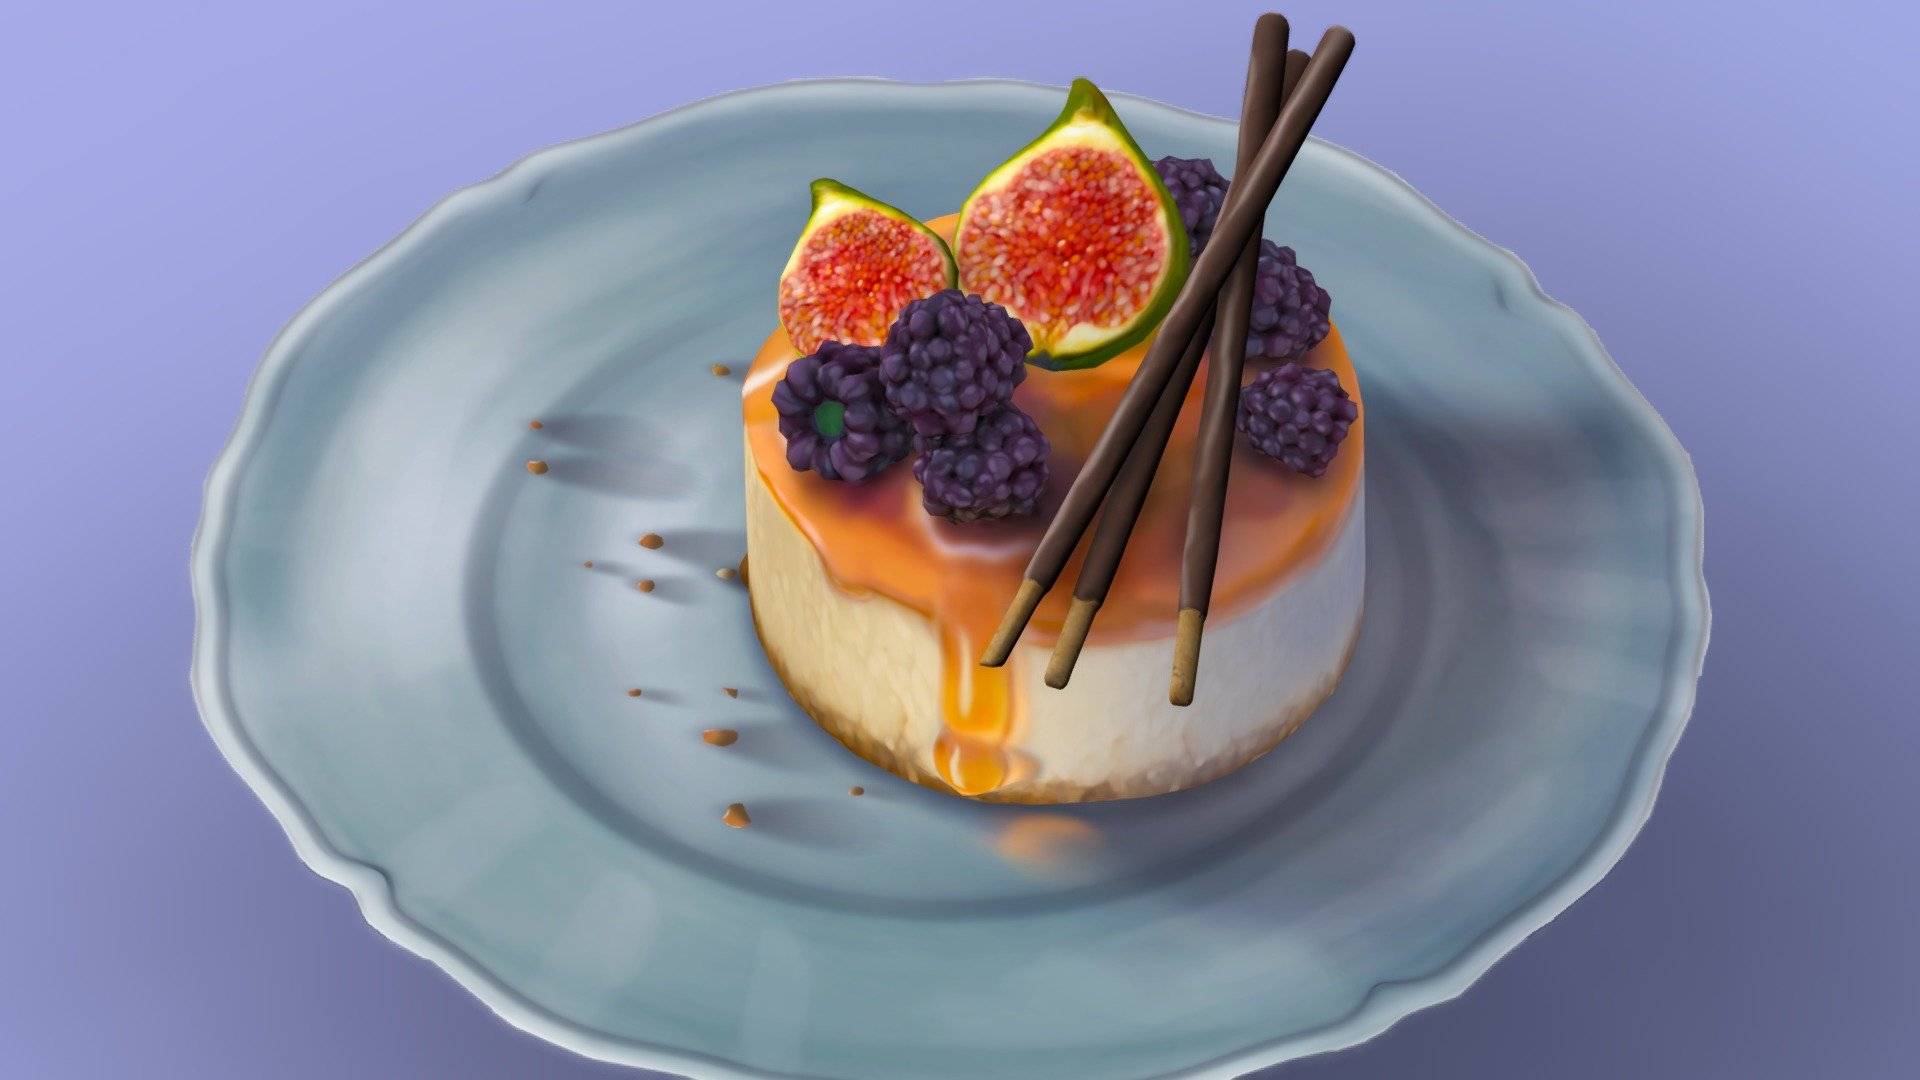 I used  Blender, sculpted in Zbrush and textured with  Substance Painter and  Photoshop ......

( no scan)

Take a piece. I recommend a good coffee. :)

my inspiration
 - little Dessert - Cheesecake - 3D model by justMe (@anomalyyy) 3d model